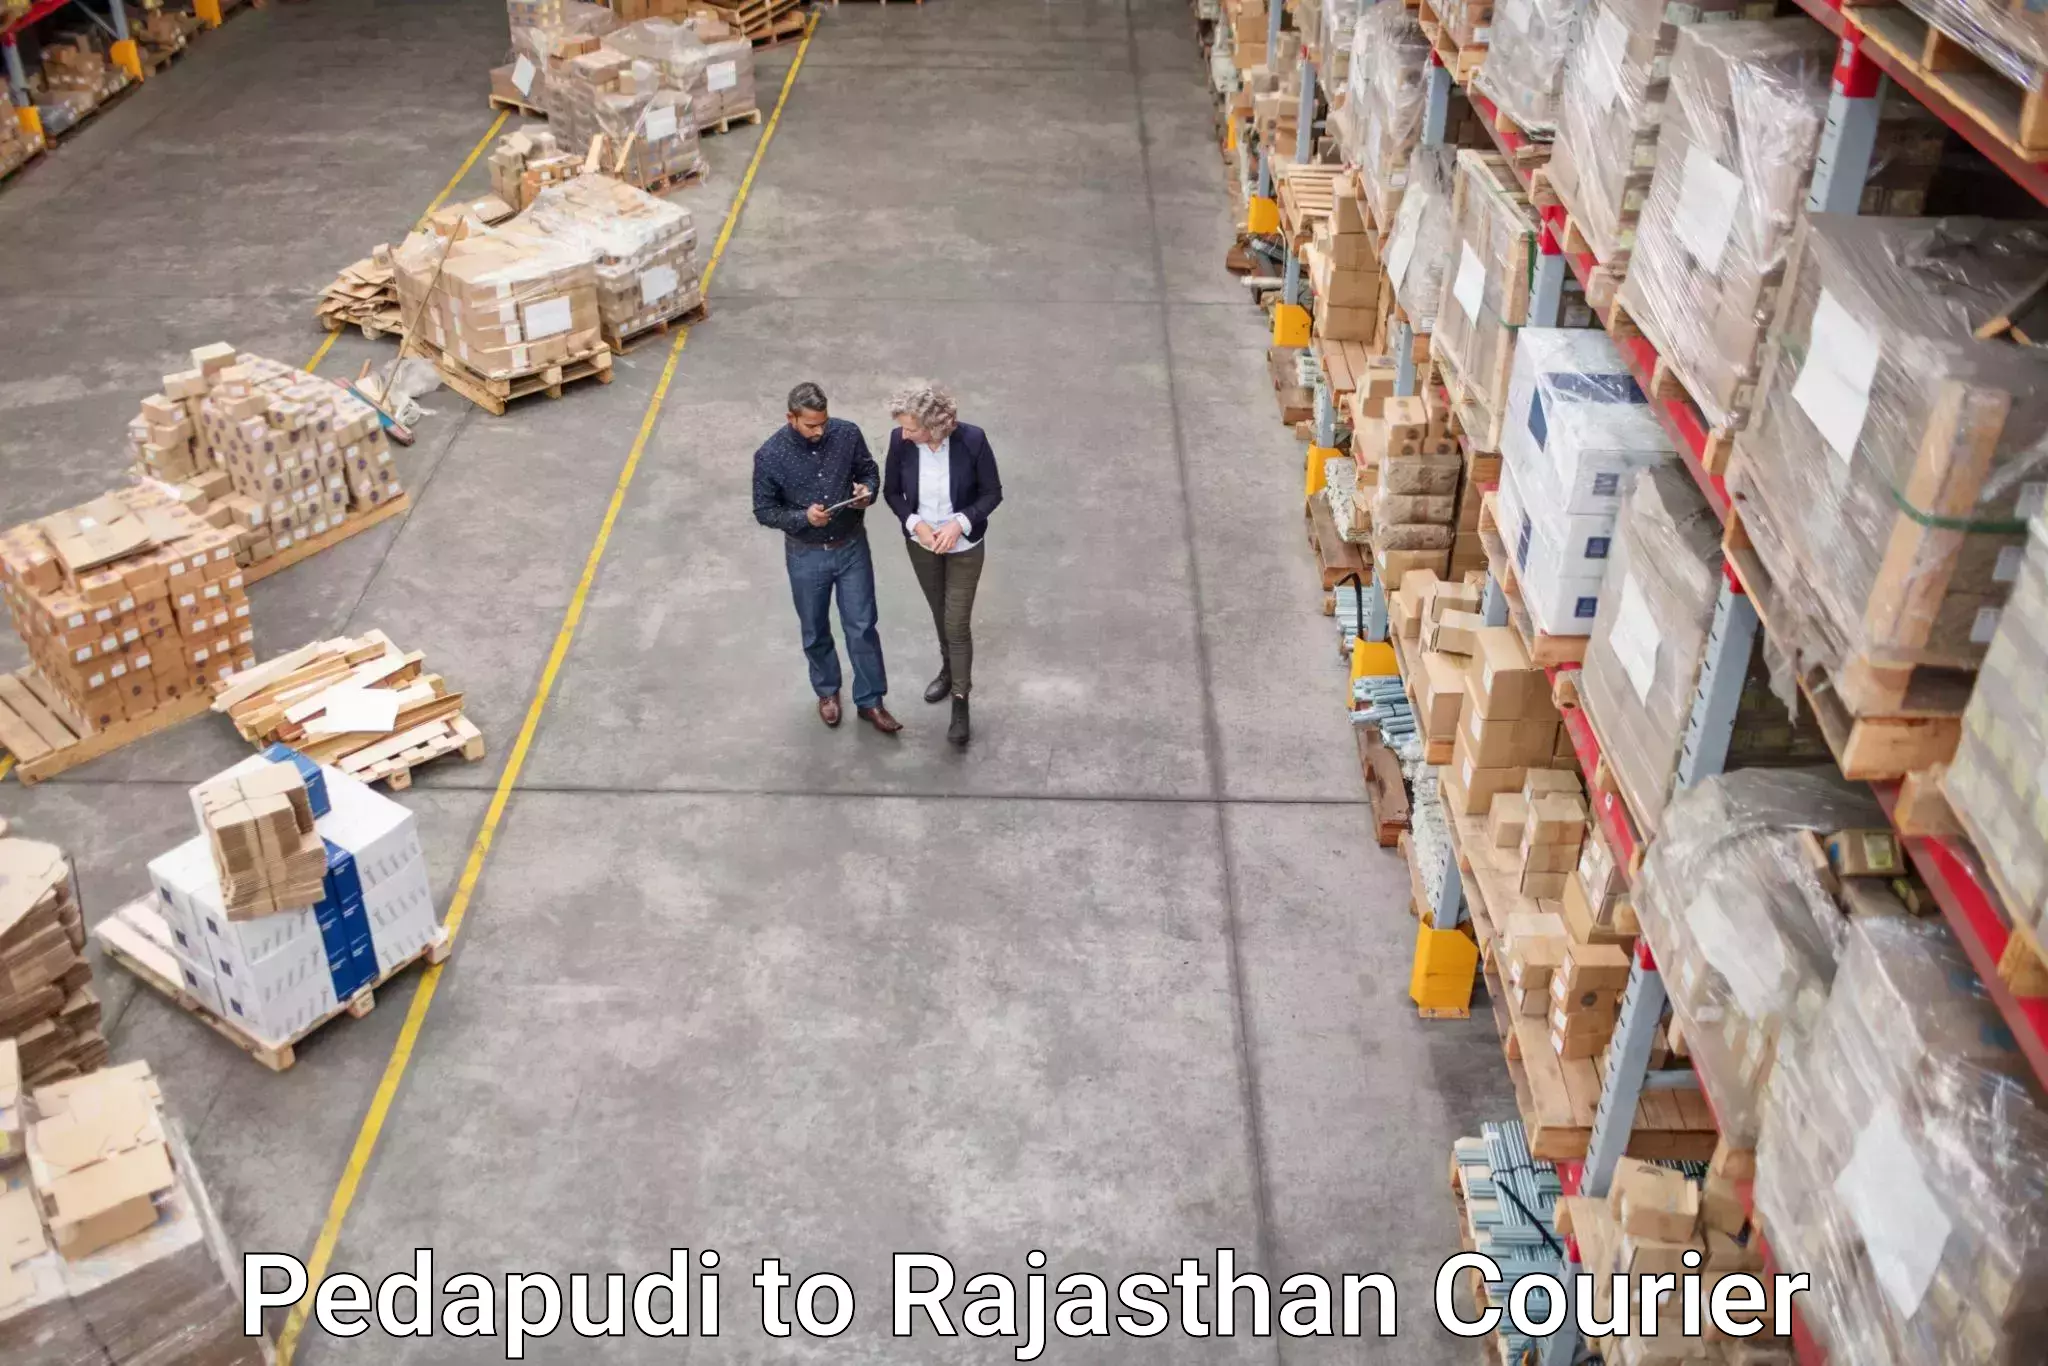 Multi-national courier services Pedapudi to Pokhran